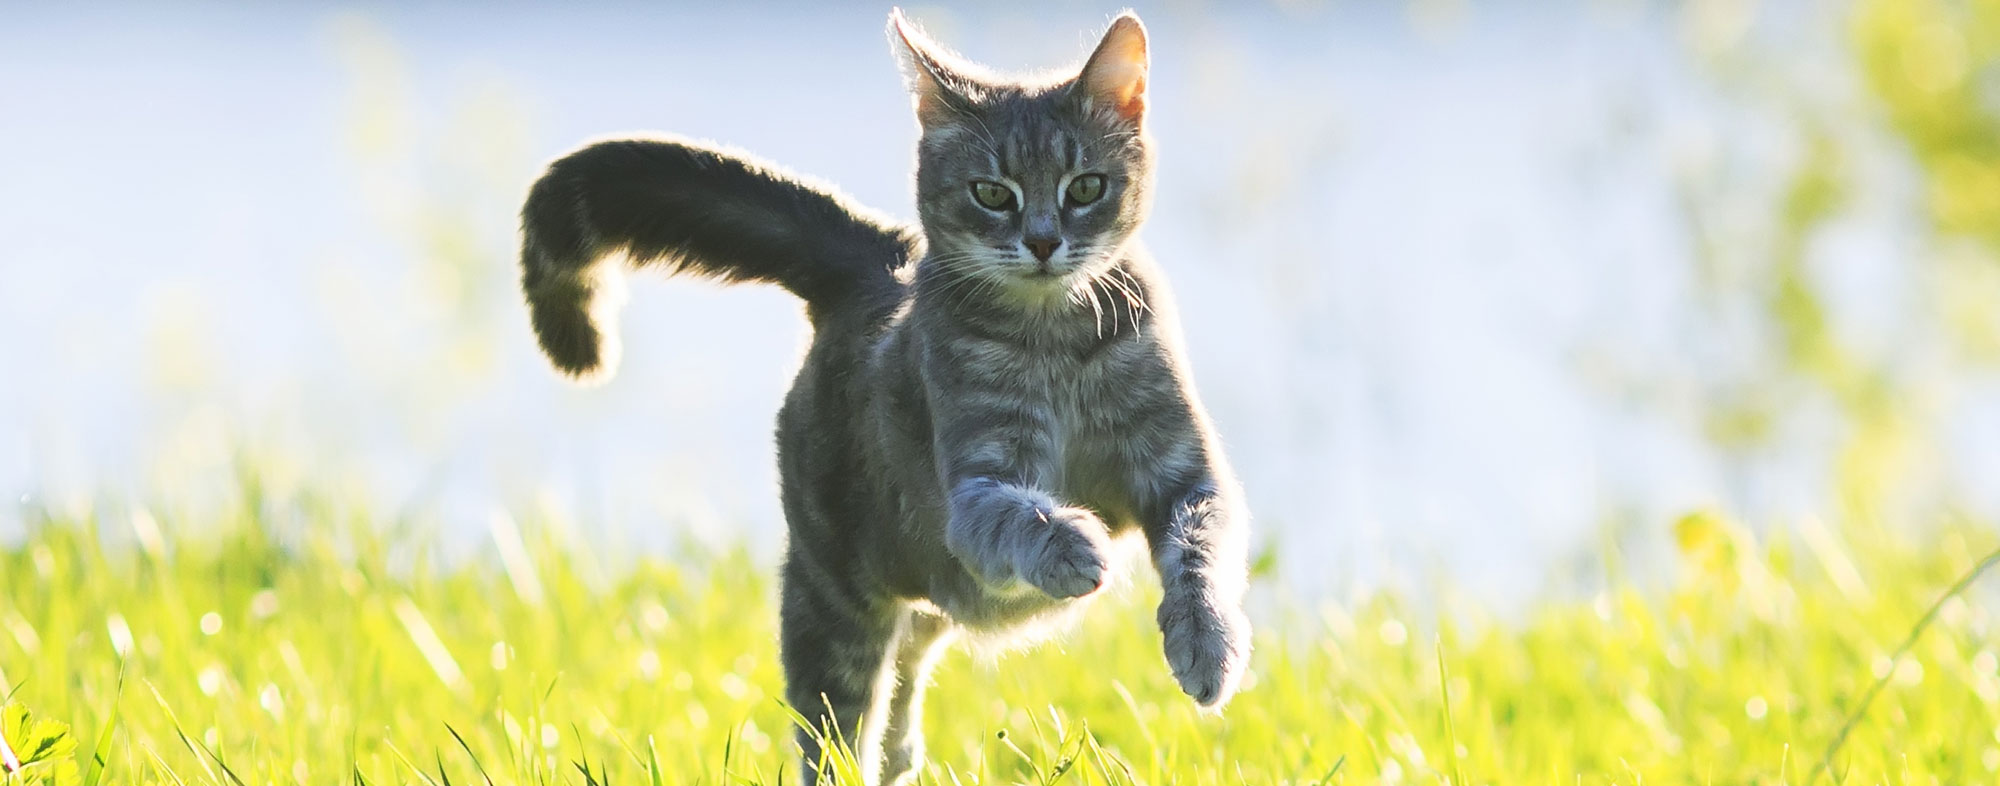 A leash or harness can introduce your indoor cat to the outdoors